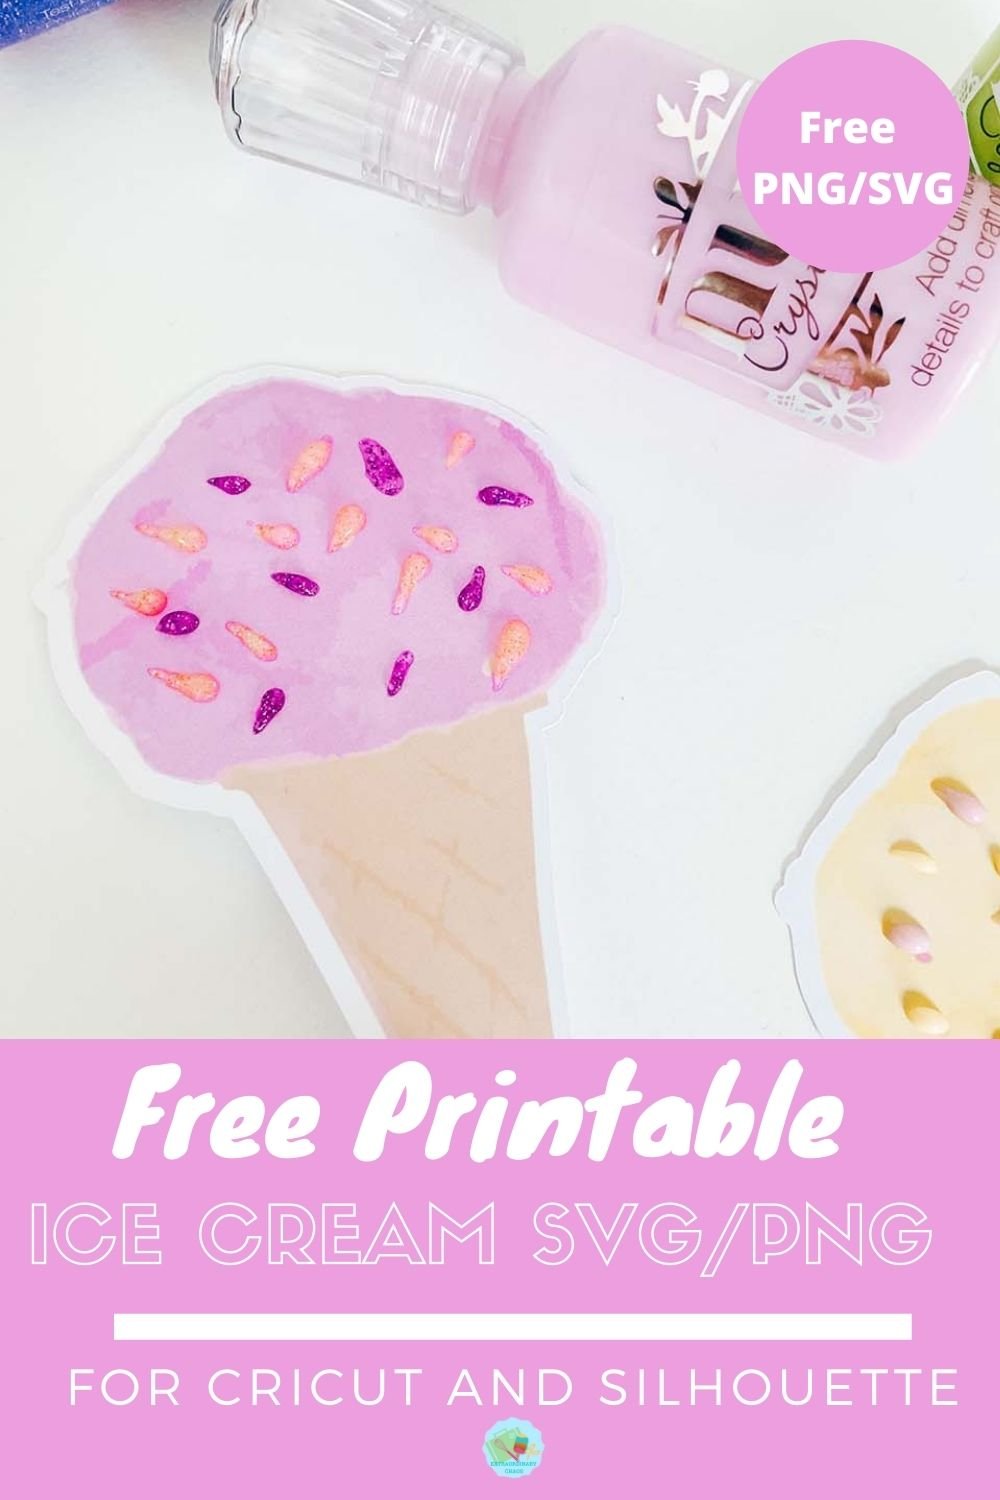 Free Printable Ice Cream SVG for Cricut And Silhouette -2